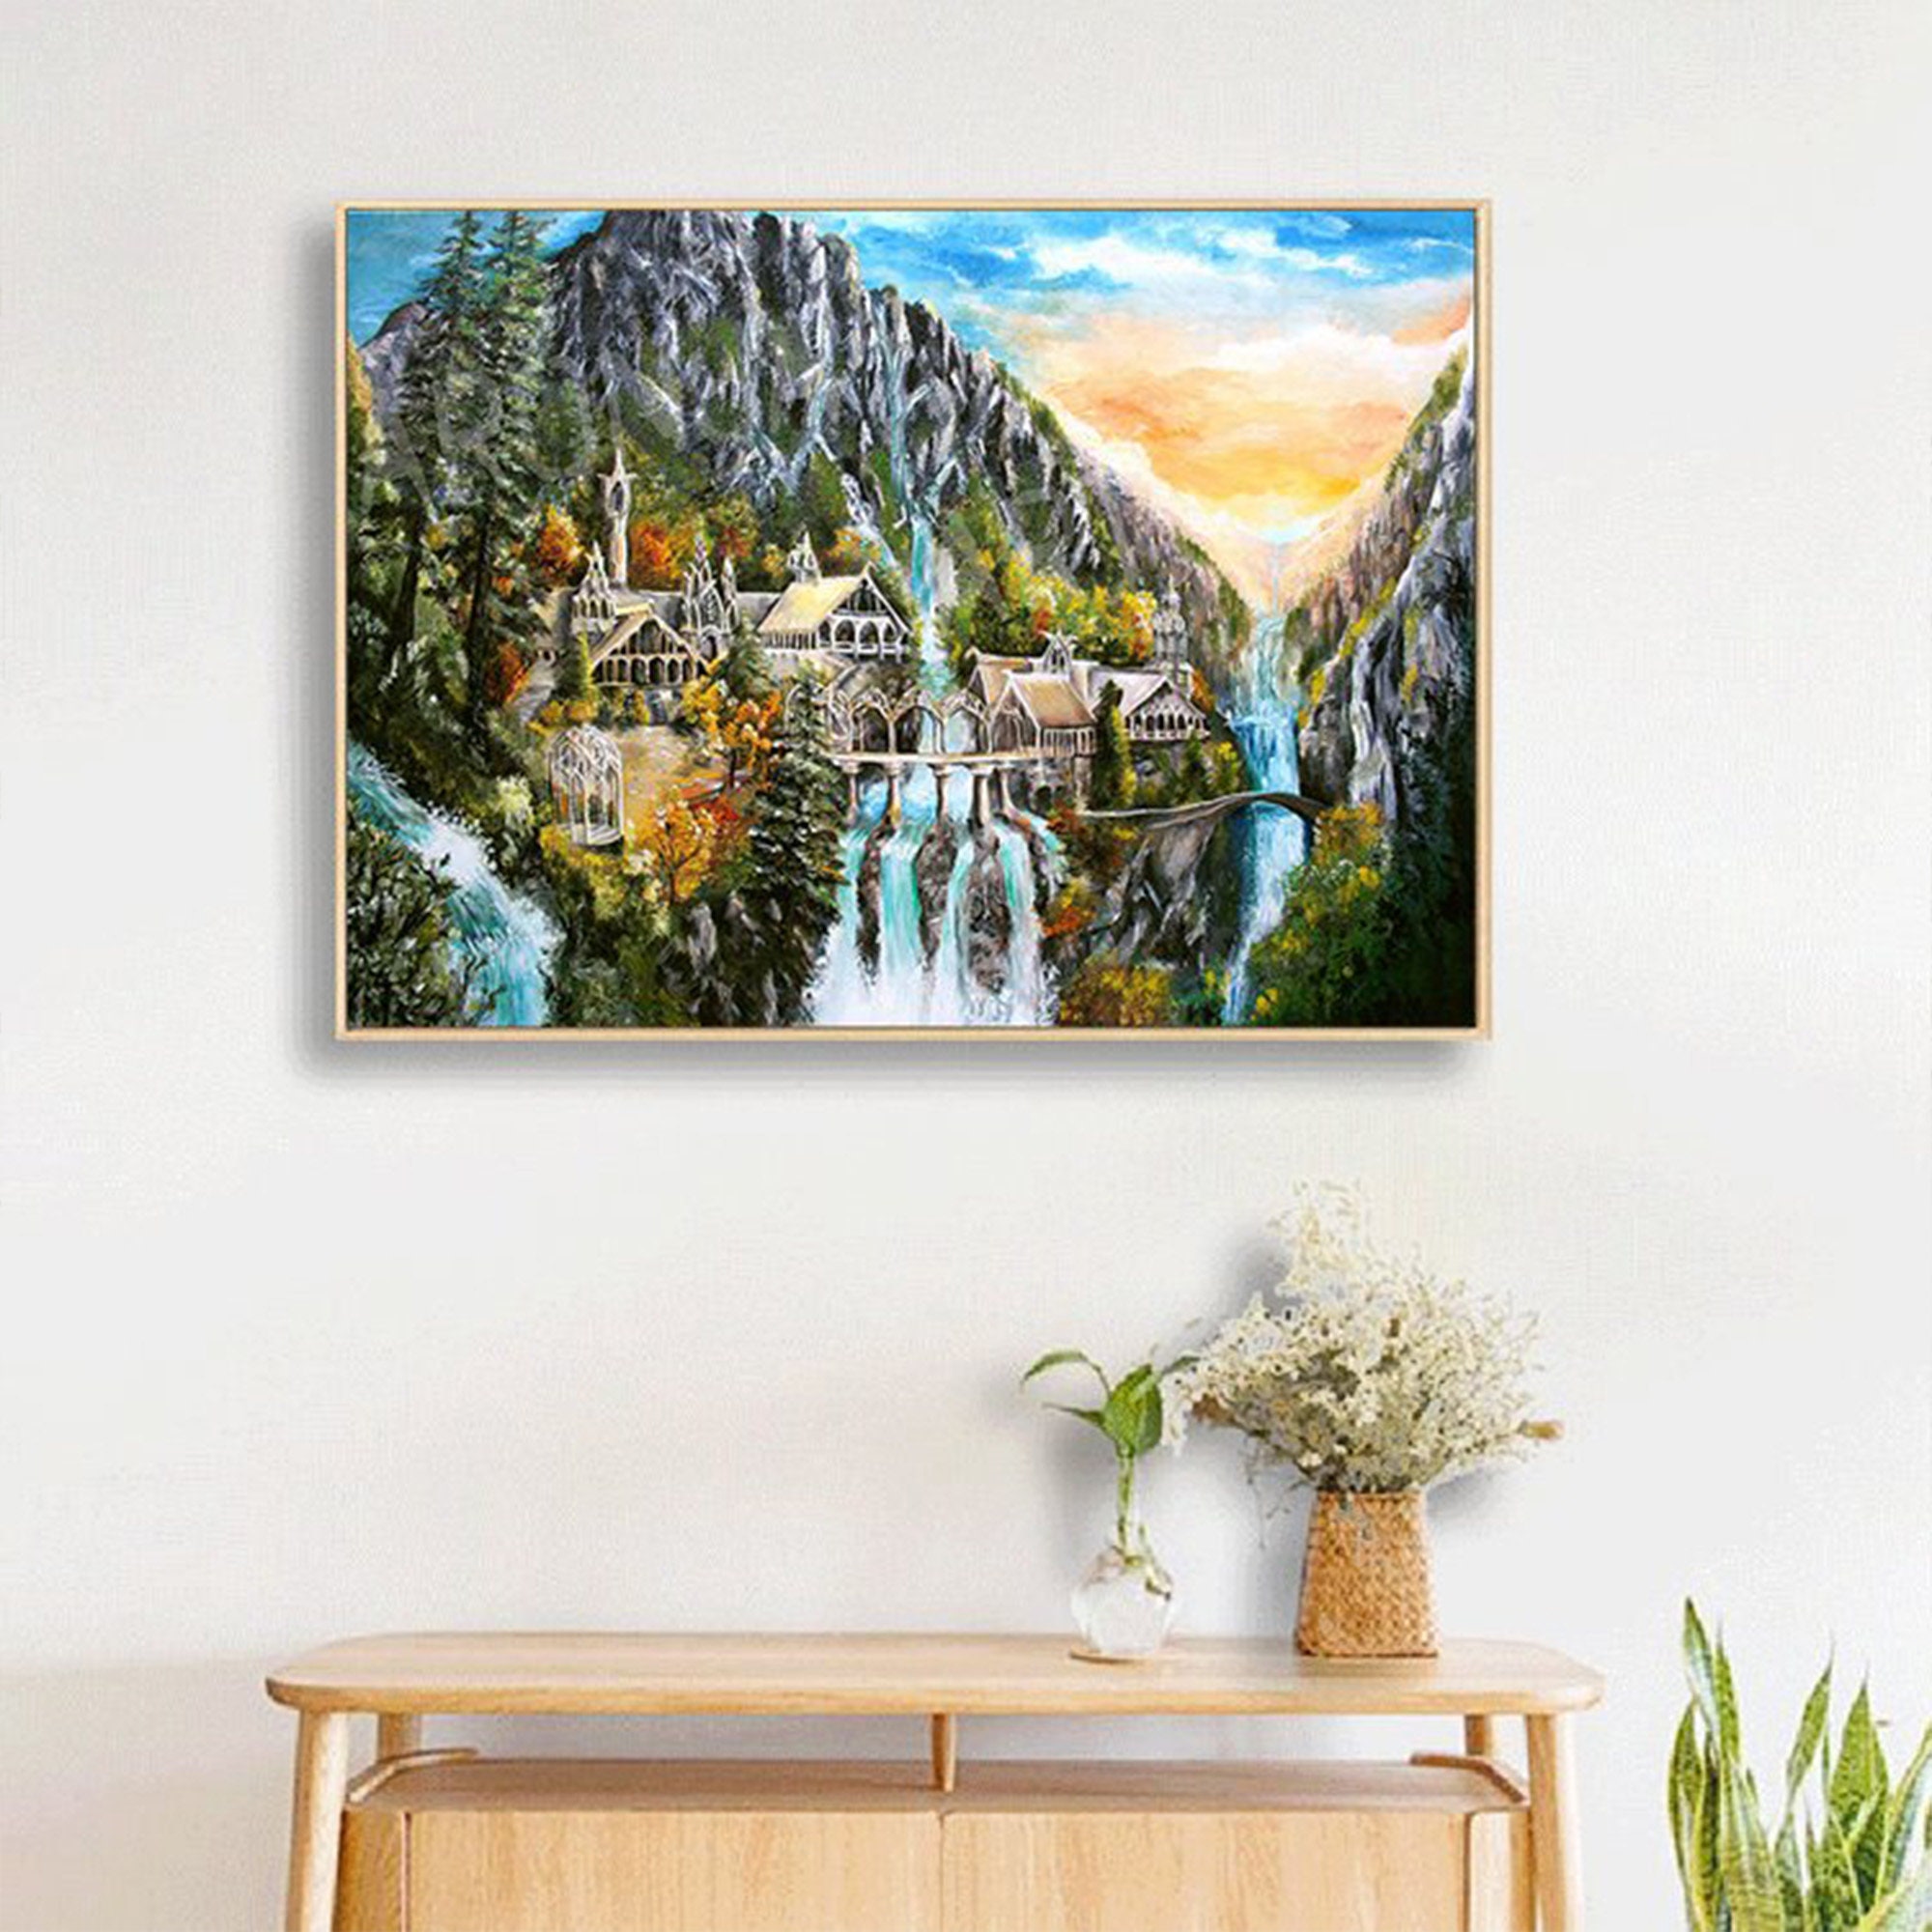 5D DIY Embroidery Diamond Painting Rivendell Mosaic Picture of ...